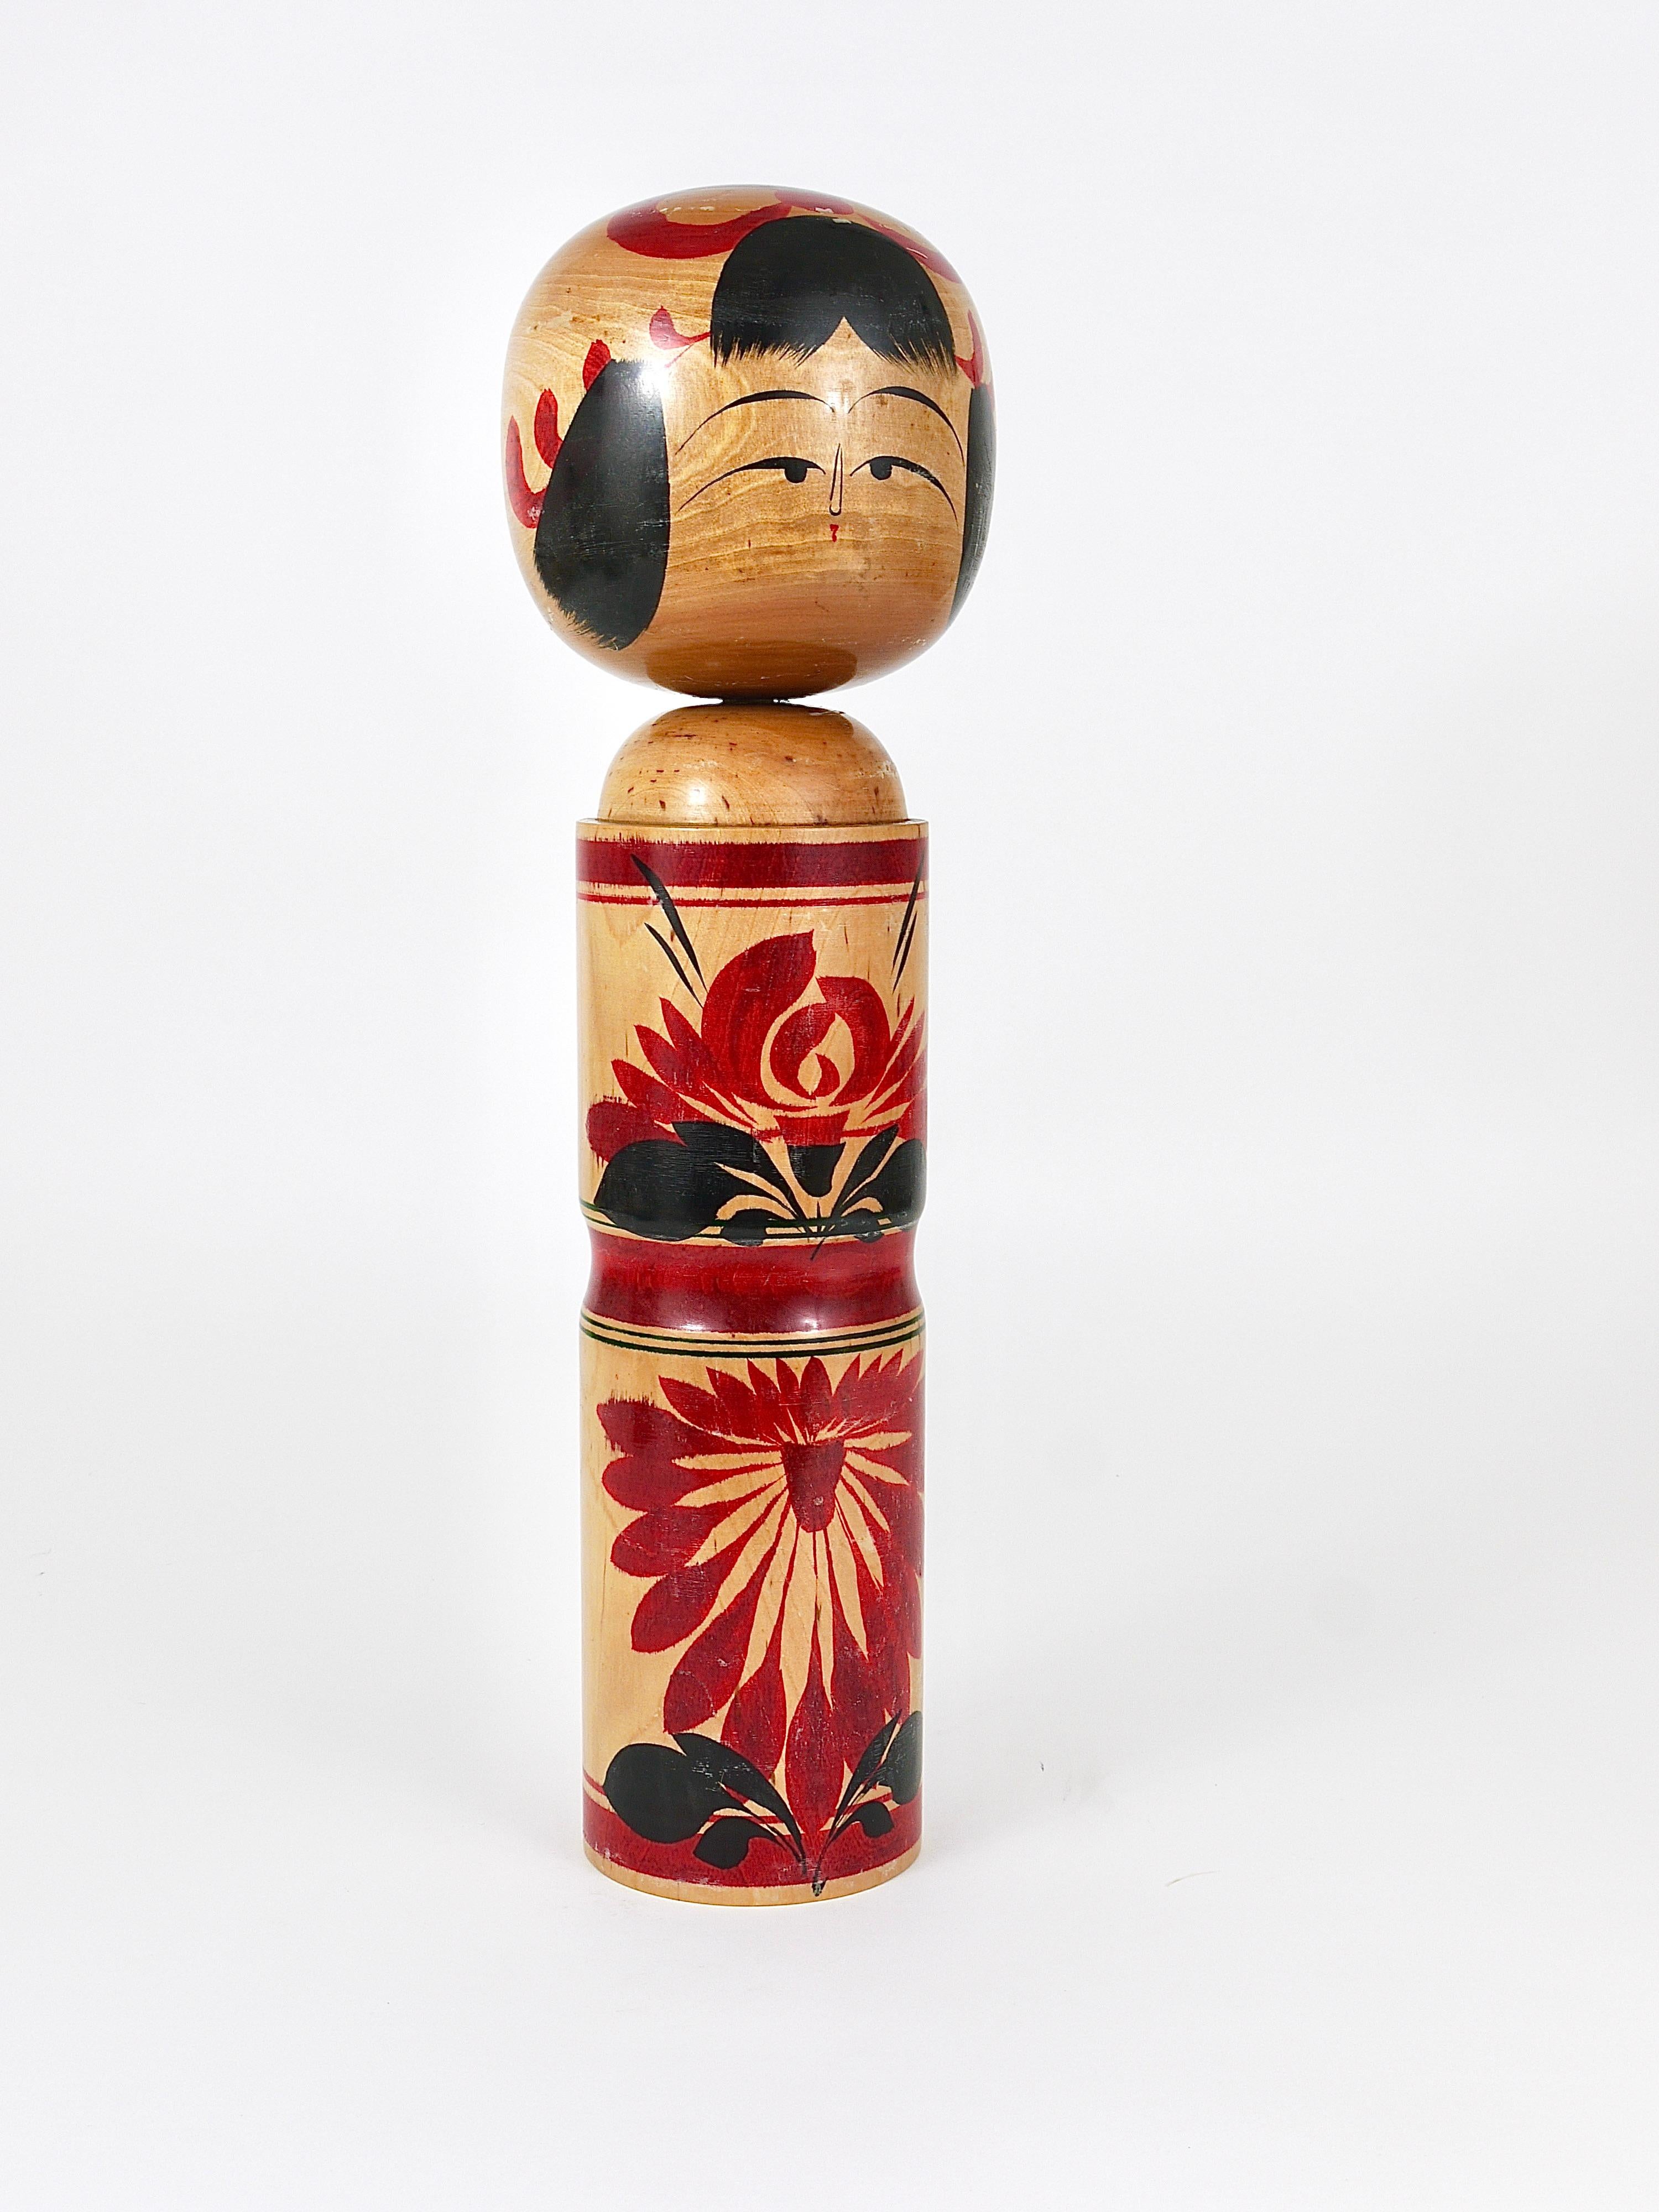 Decorative Kokeshi Doll Sculpture from Northern Japan, Hand-Painted, Signed 3